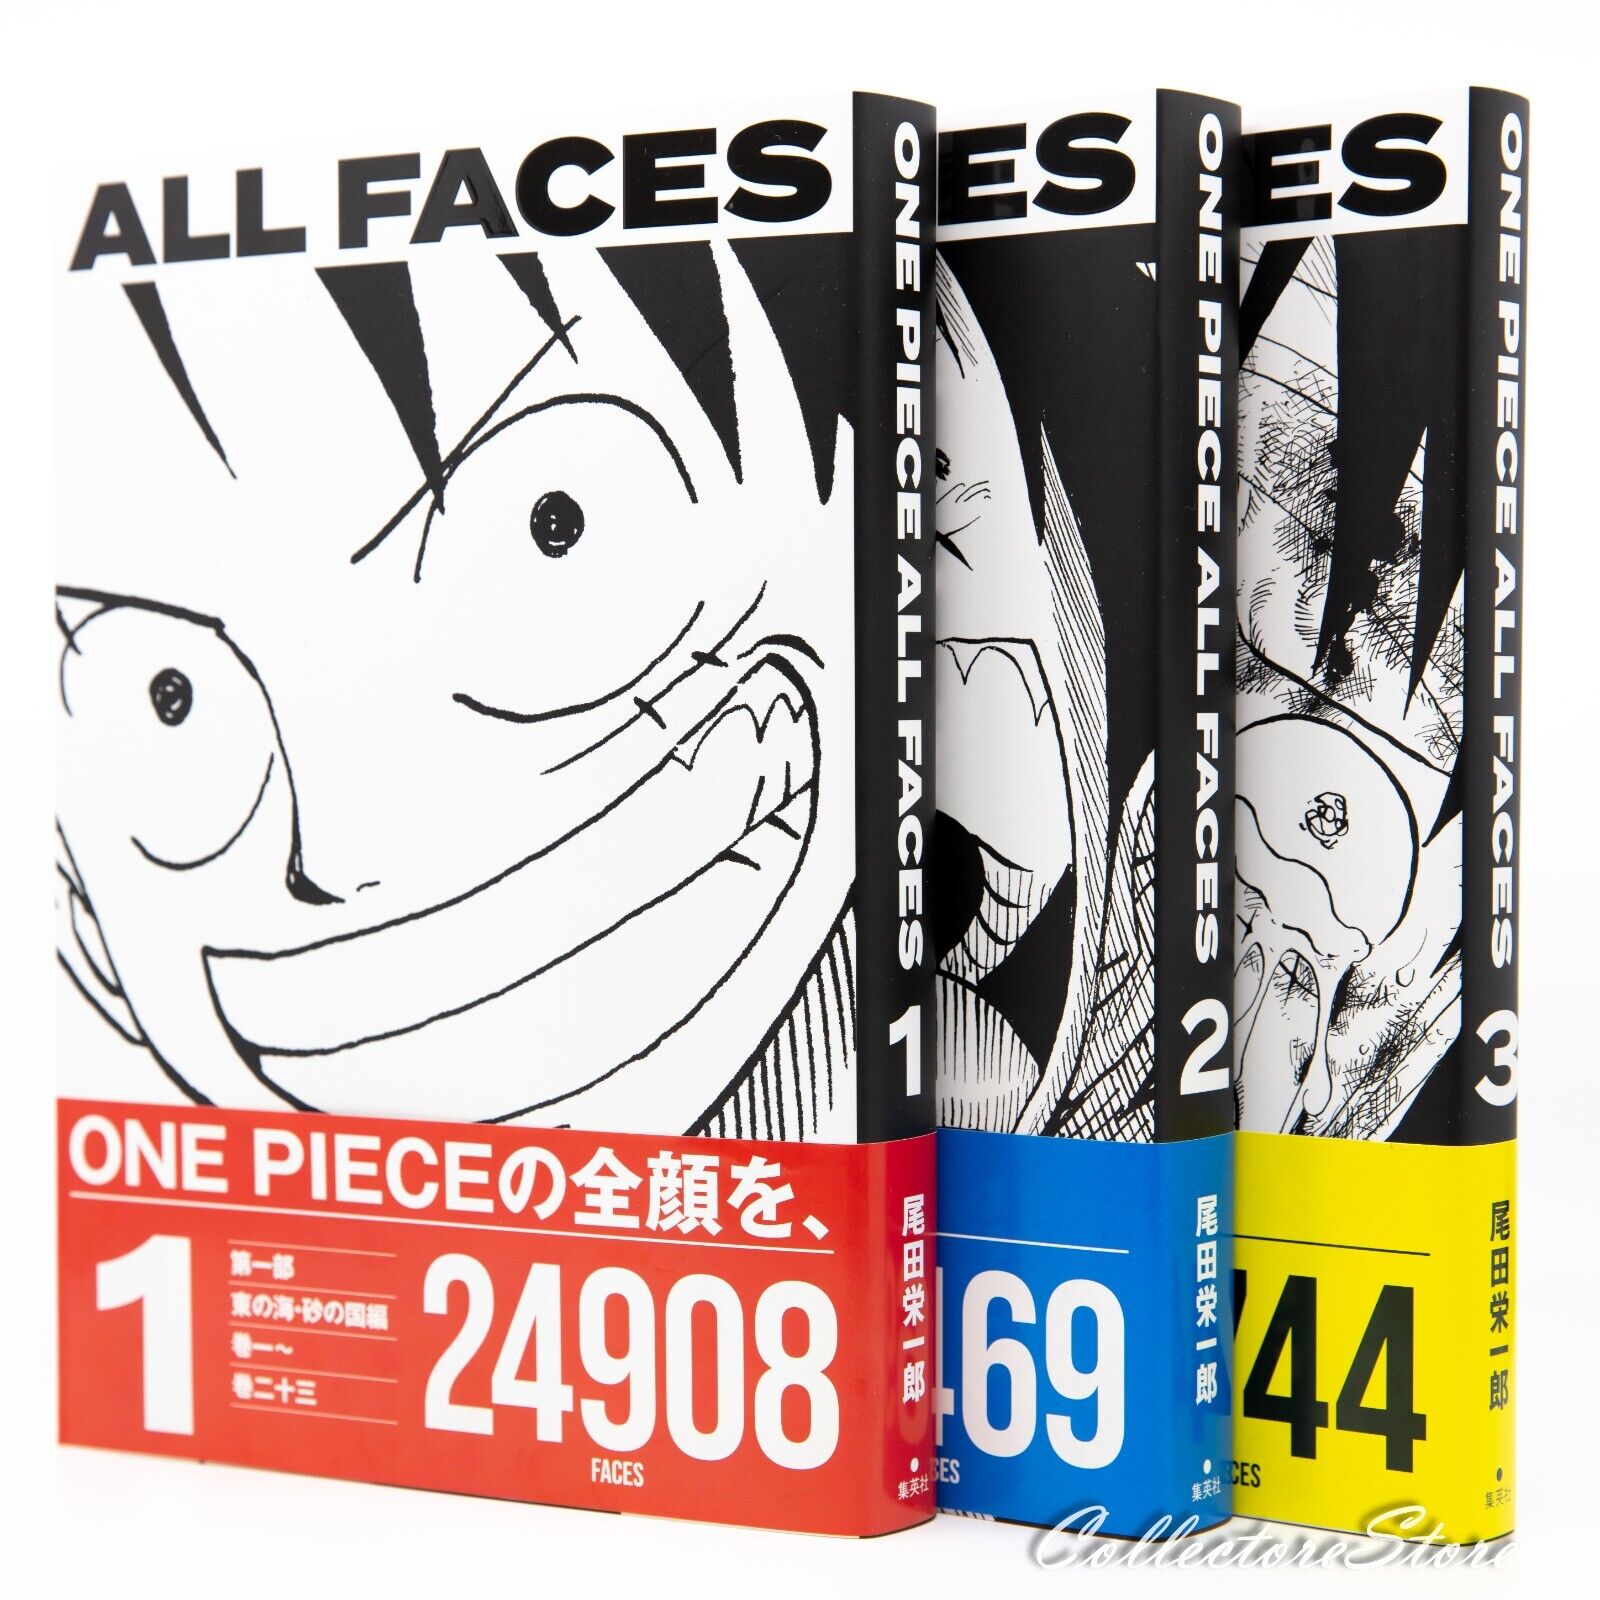 One Piece All Faces 1 - 3 Collector's Edition Comic (FedEx/DHL)